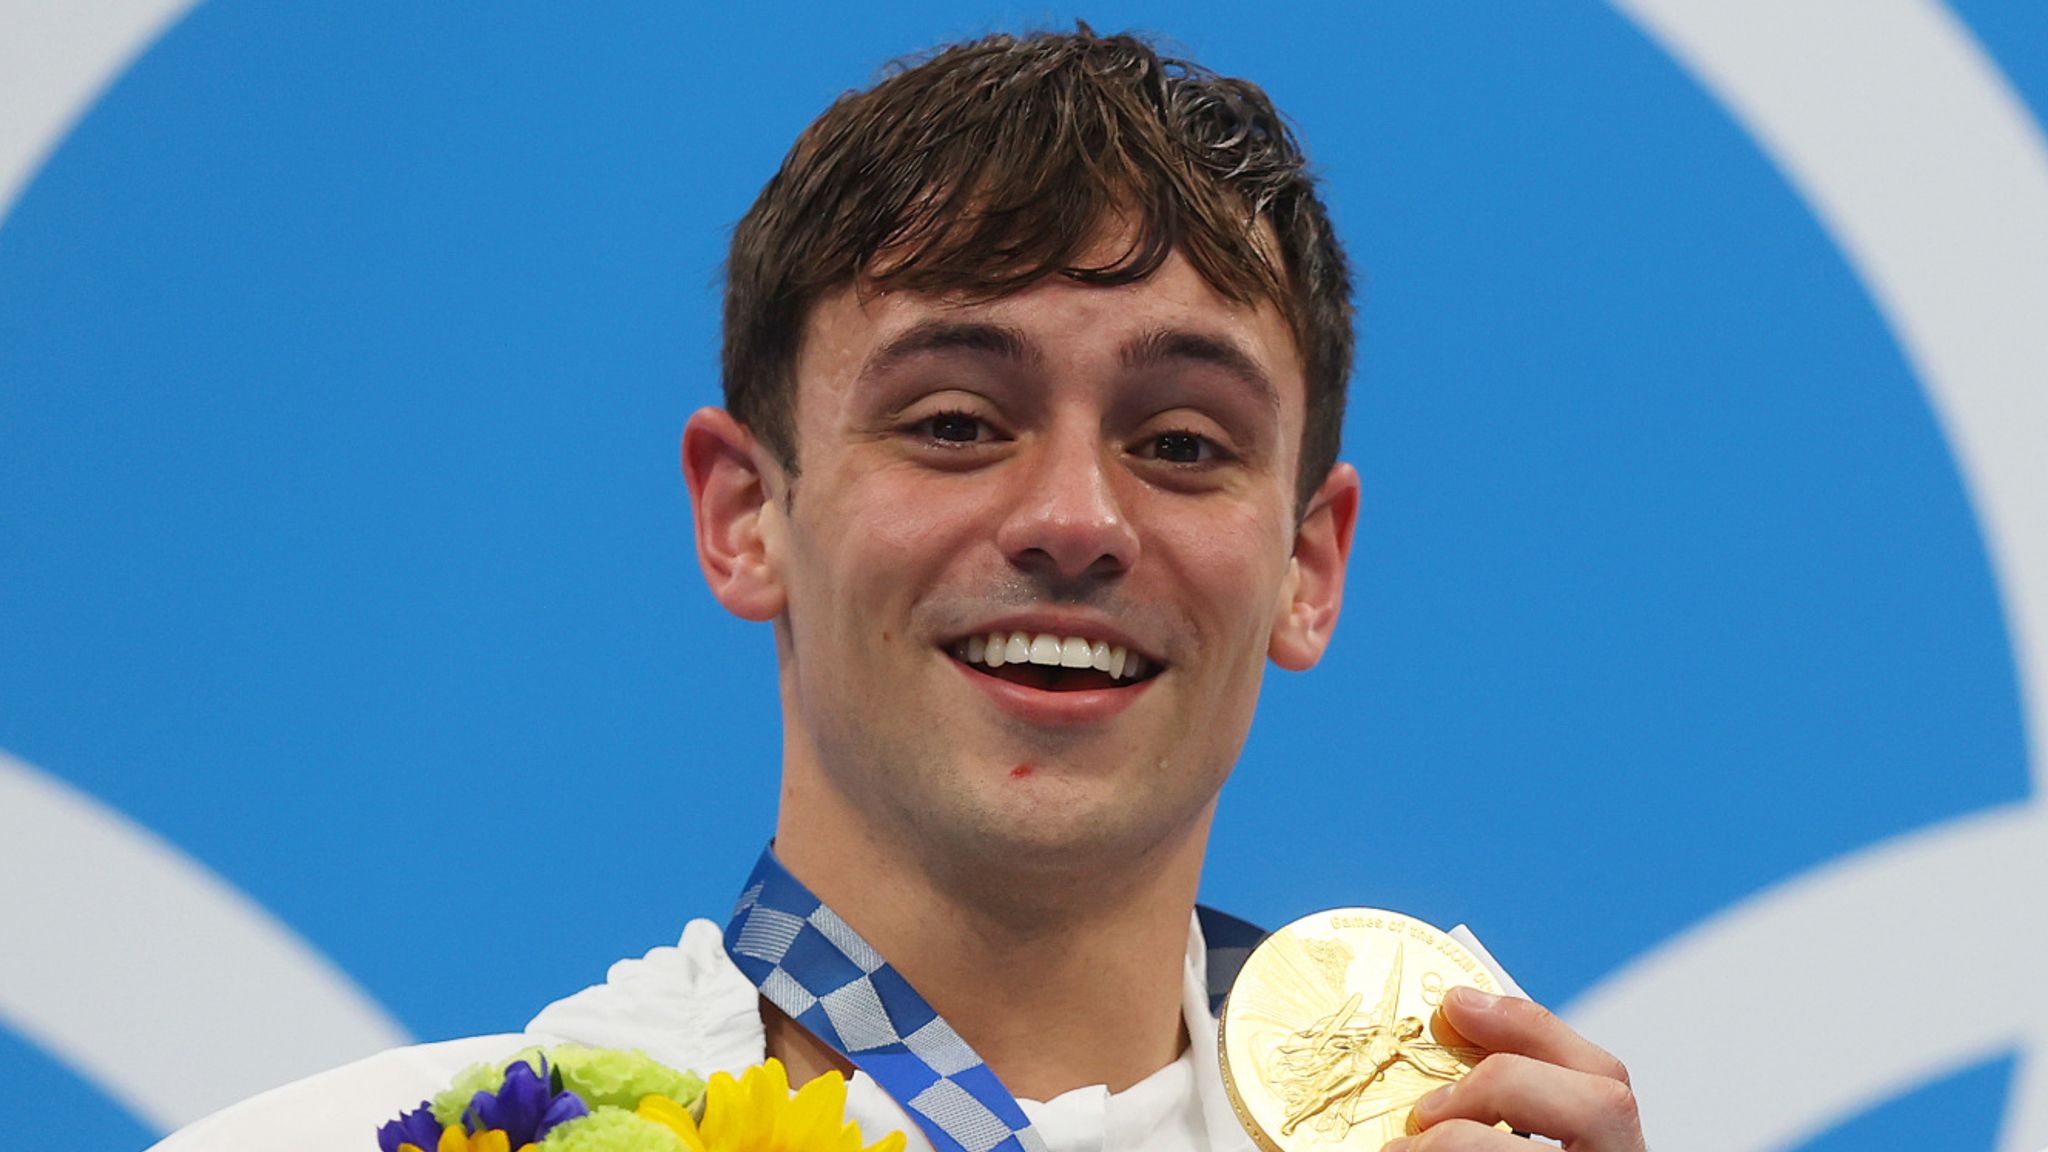 Perseverance pays off for Tom Daley